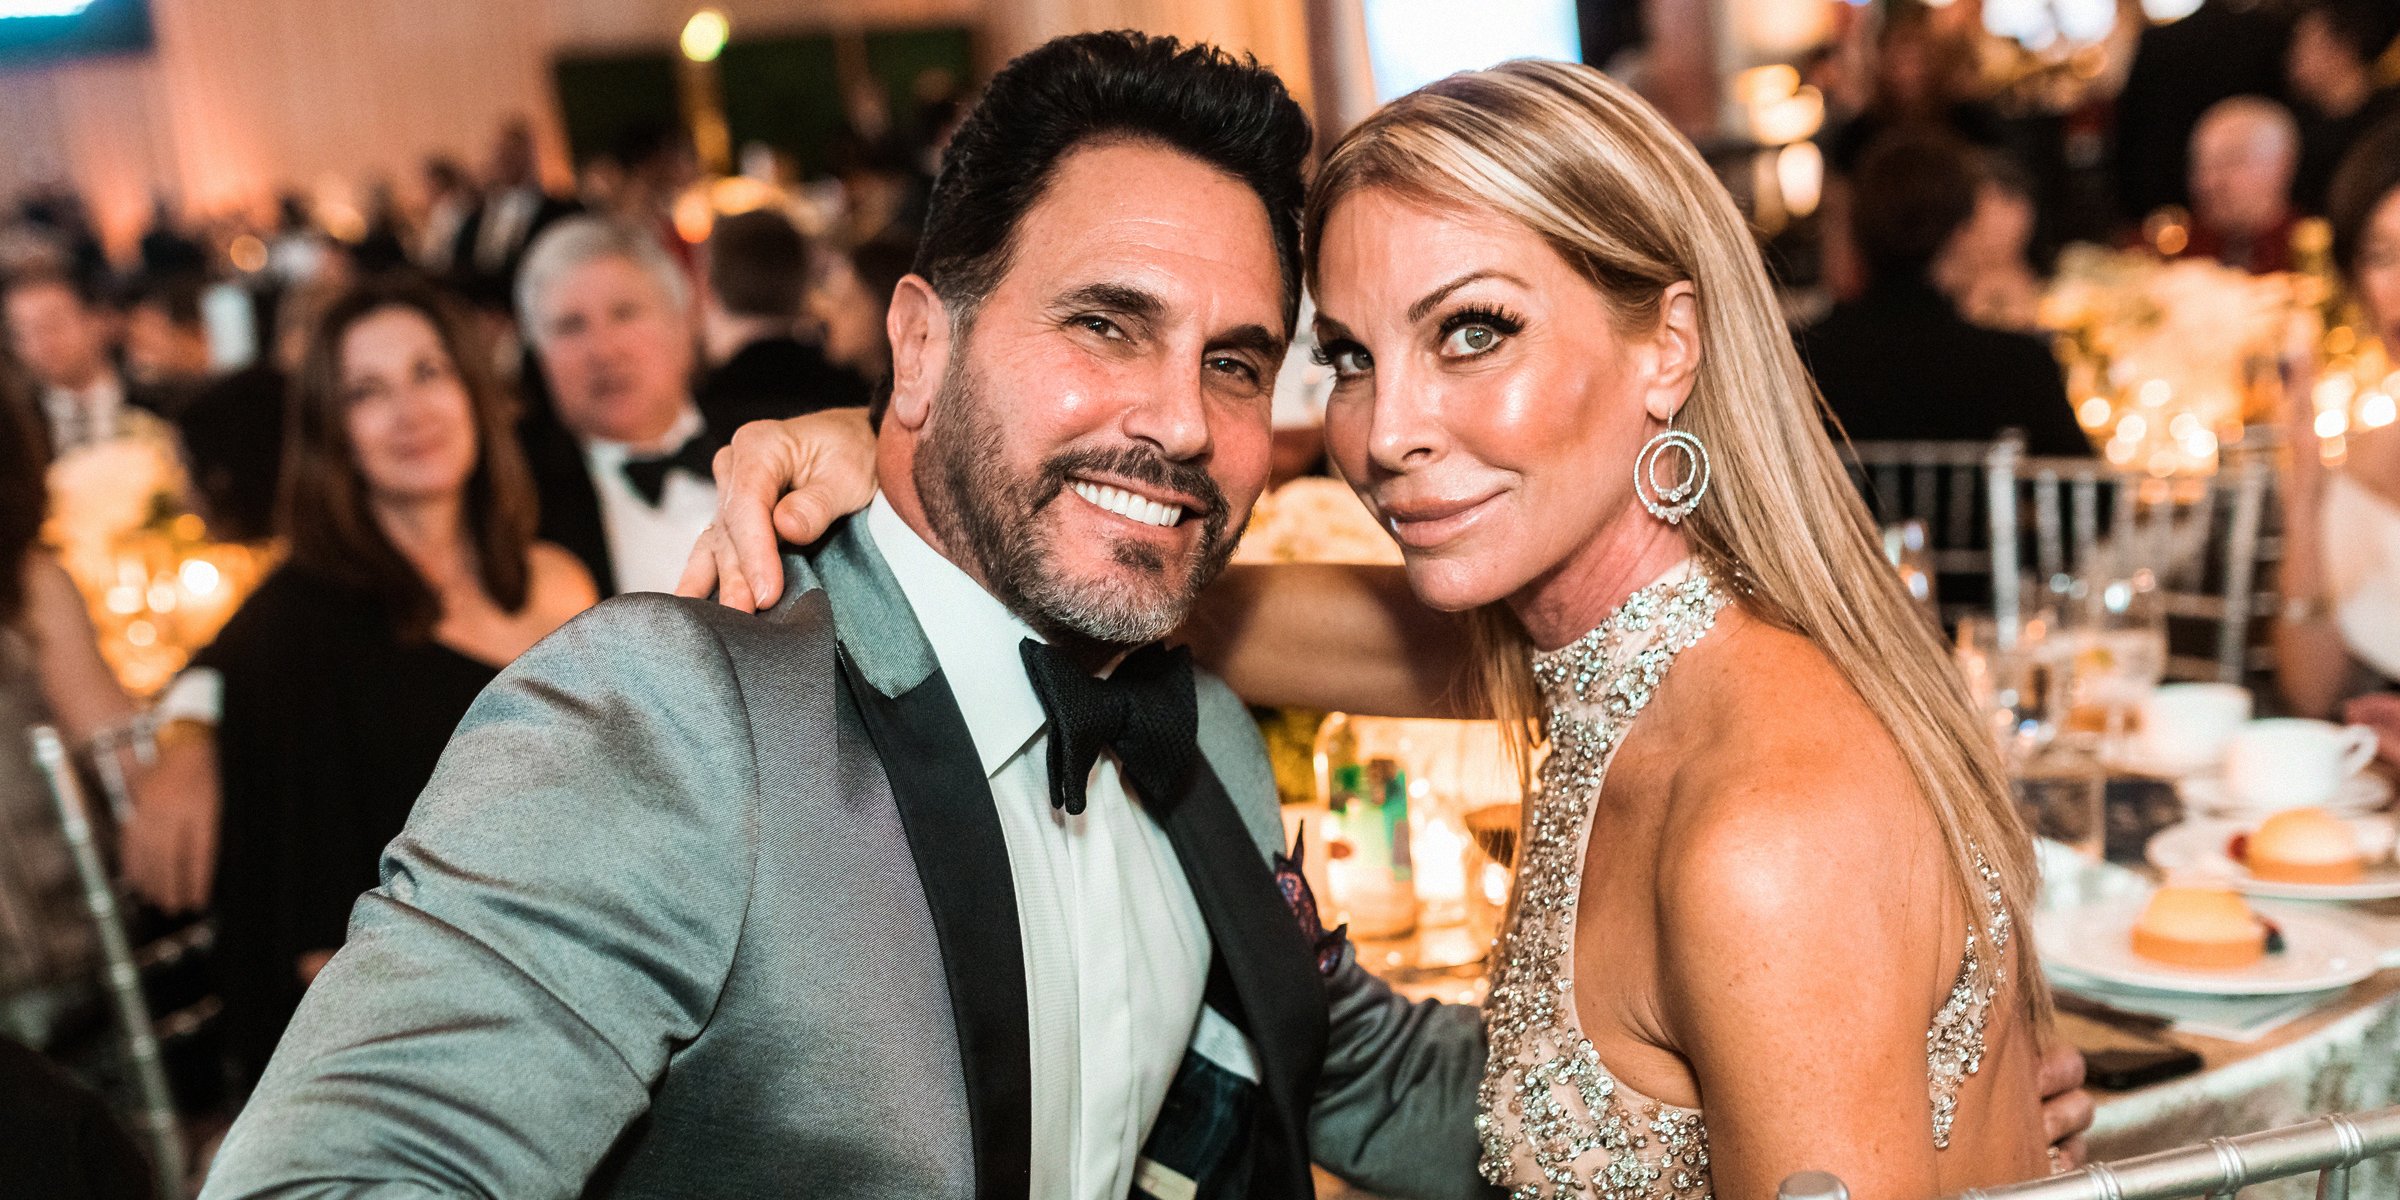 Don Diamont and Cindy Ambuehl | Source: Getty Images